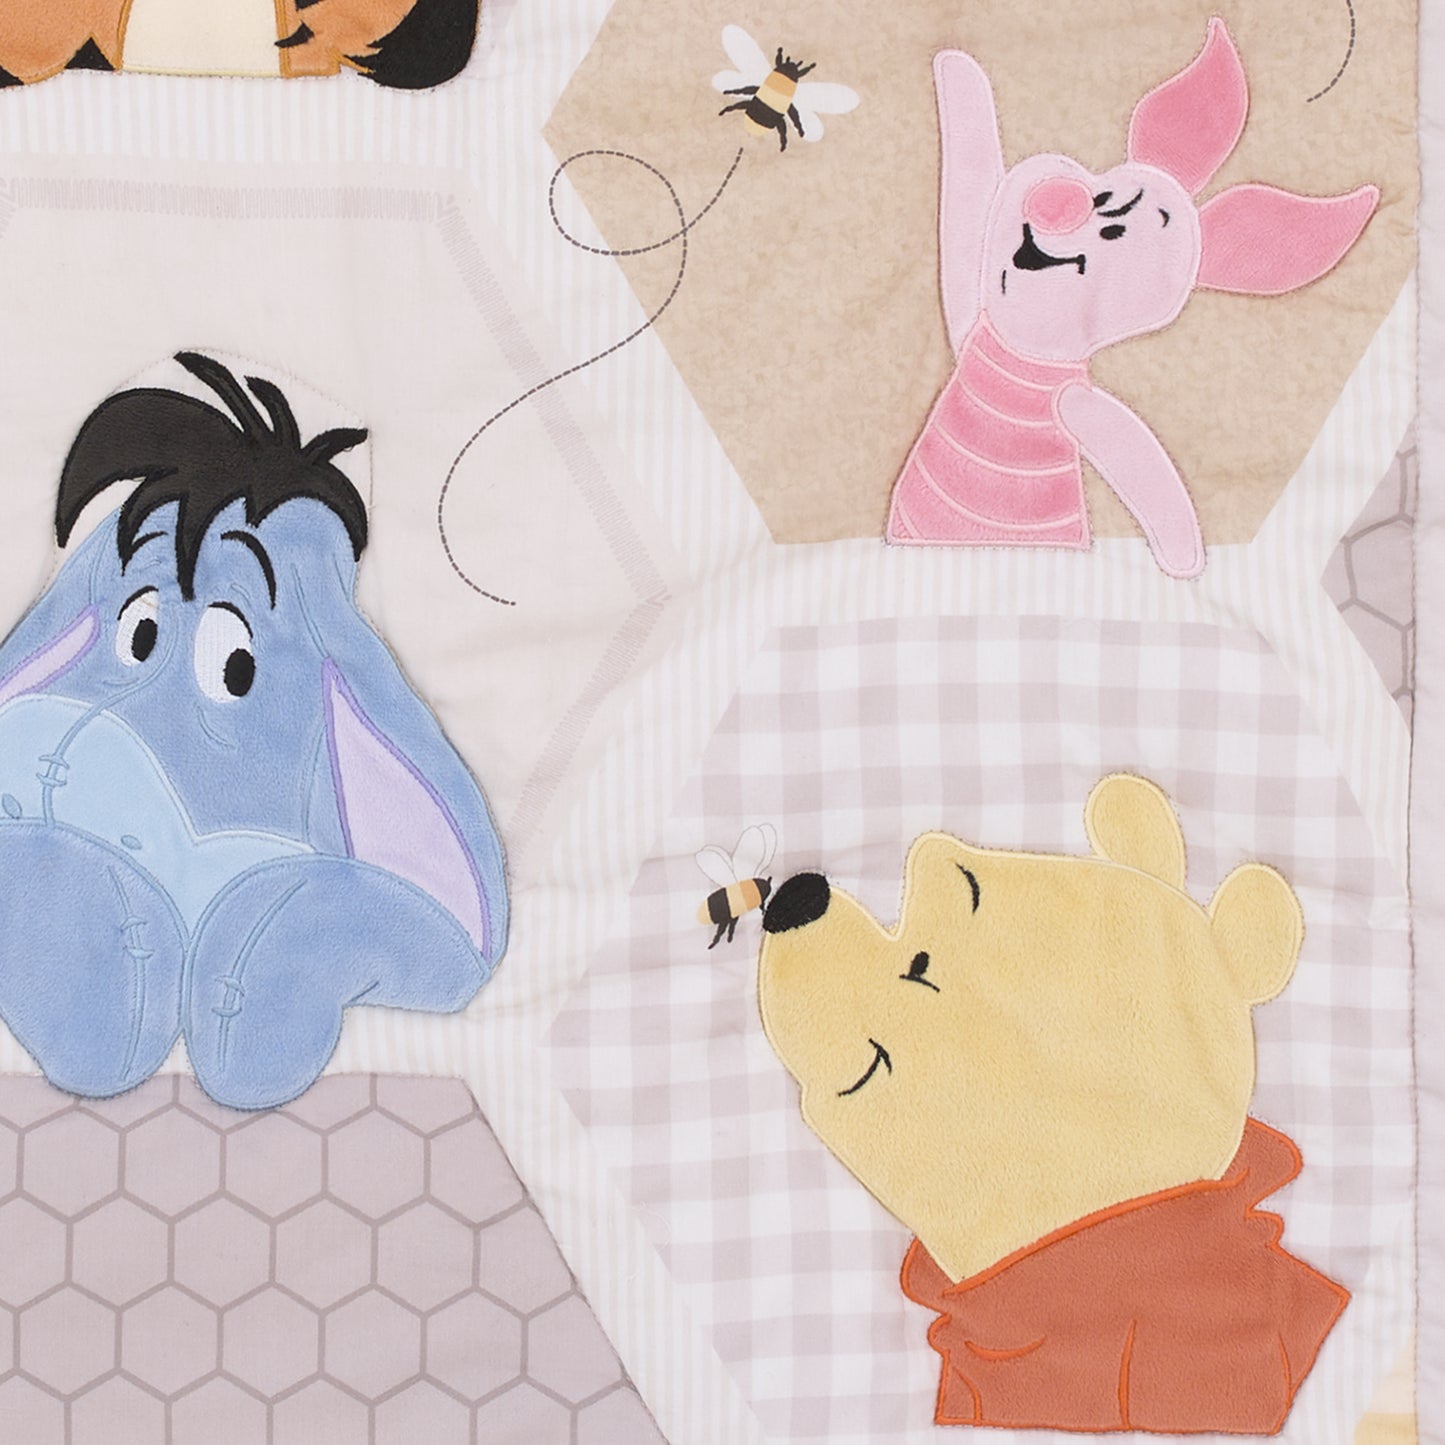 Disney Winnie the Pooh Hugs and Honeycombs Grey, White, and Tan Patchwork with Piglet, Tigger and Eeyore 3 Piece Crib Bedding Set - Comforter, 100% Cotton Fitted Crib Sheet, and Crib Skirt